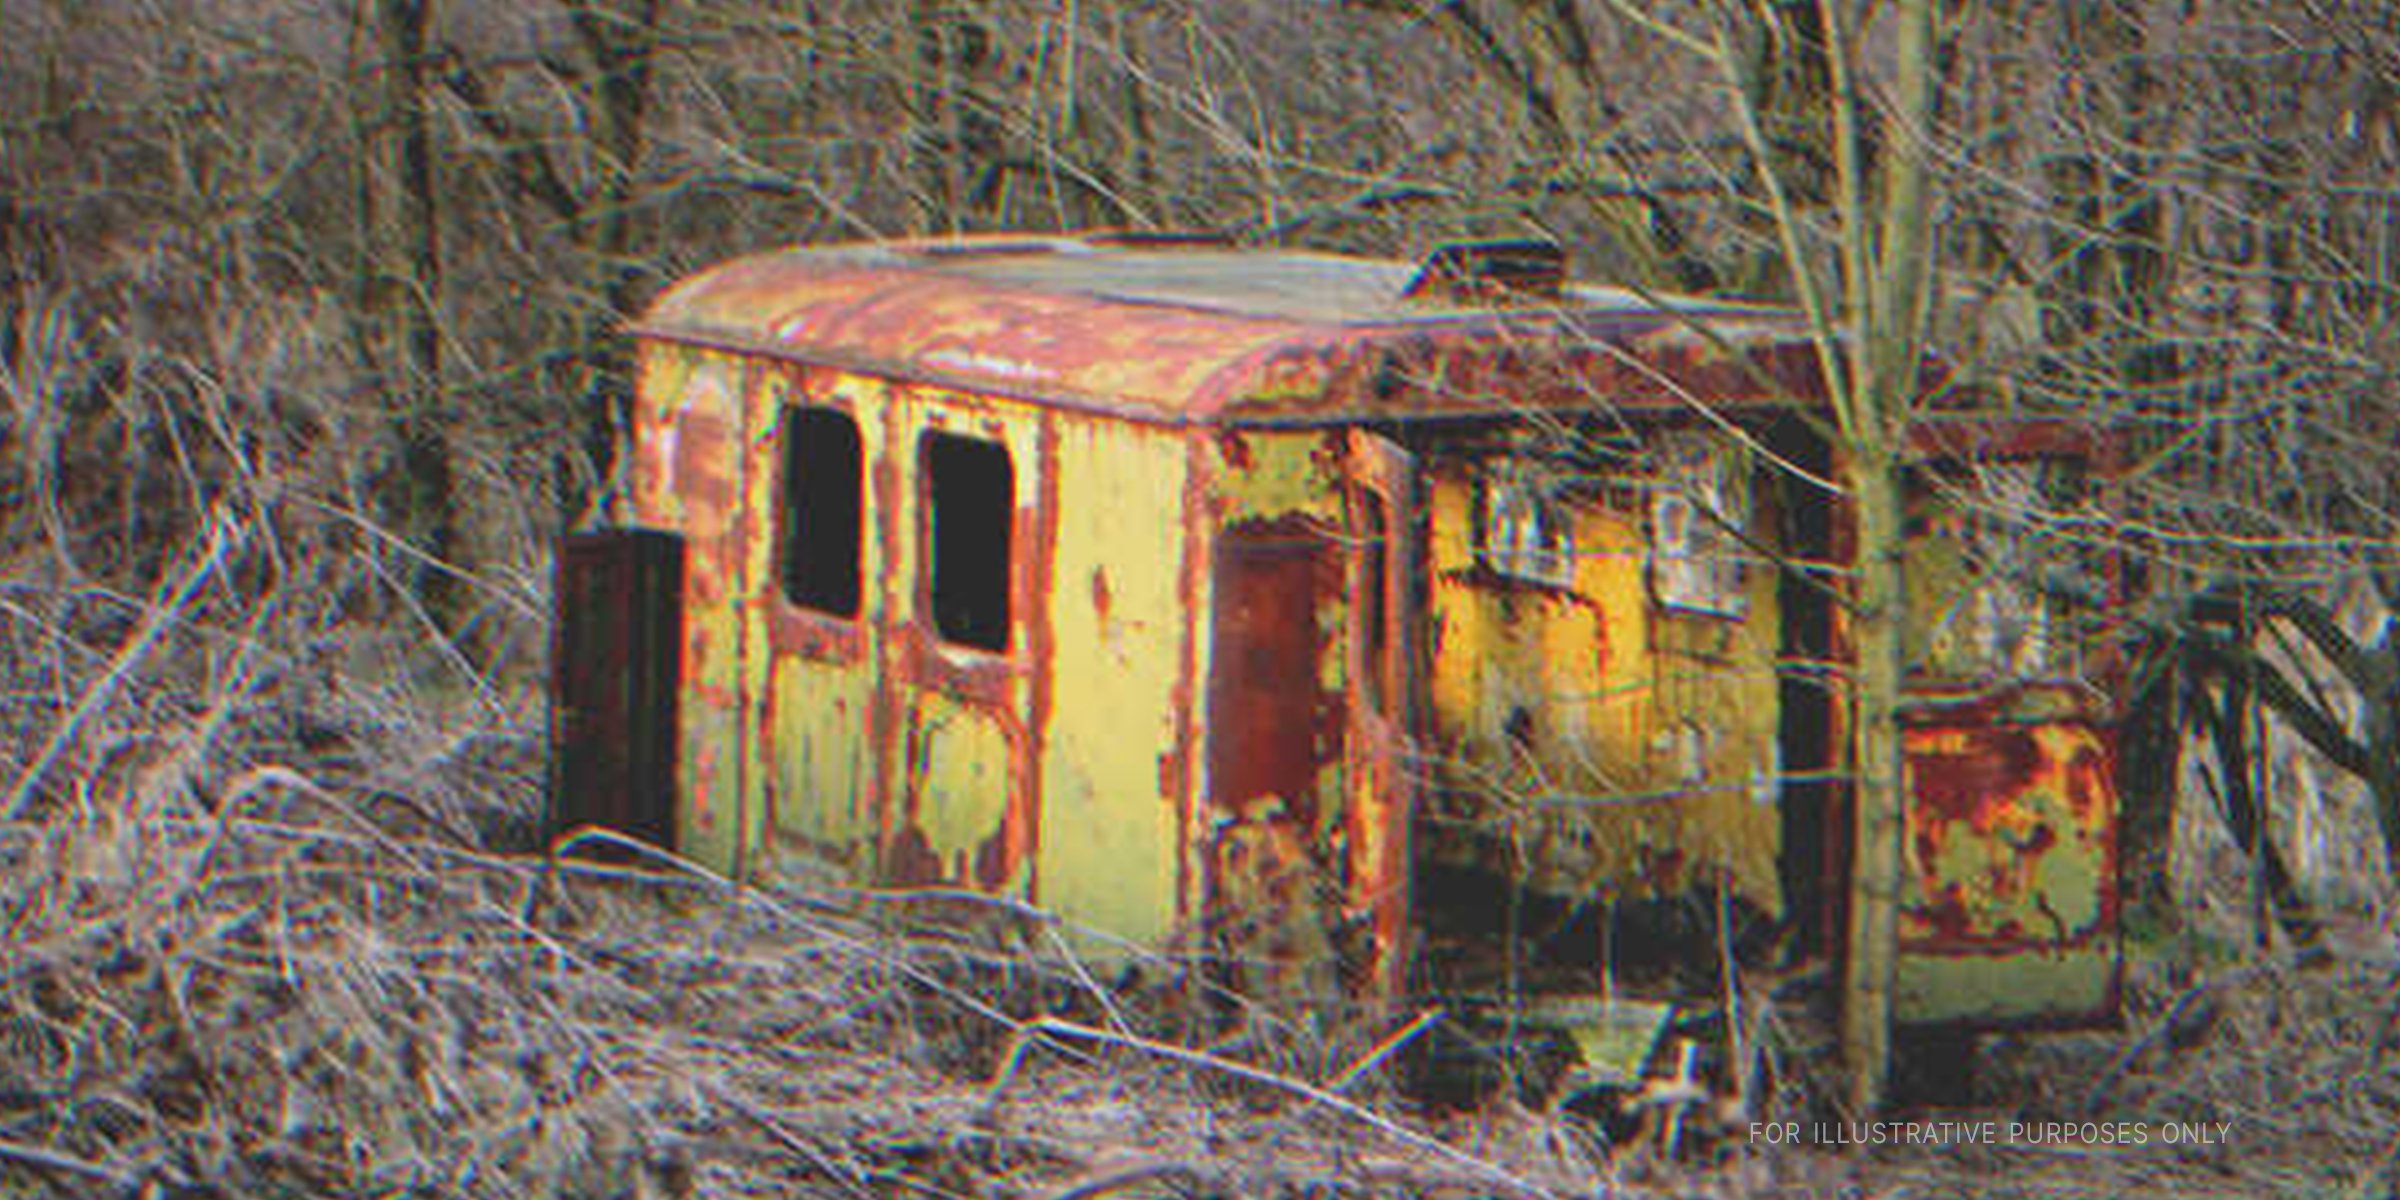 Old trailer in the woods. | Shutterstock